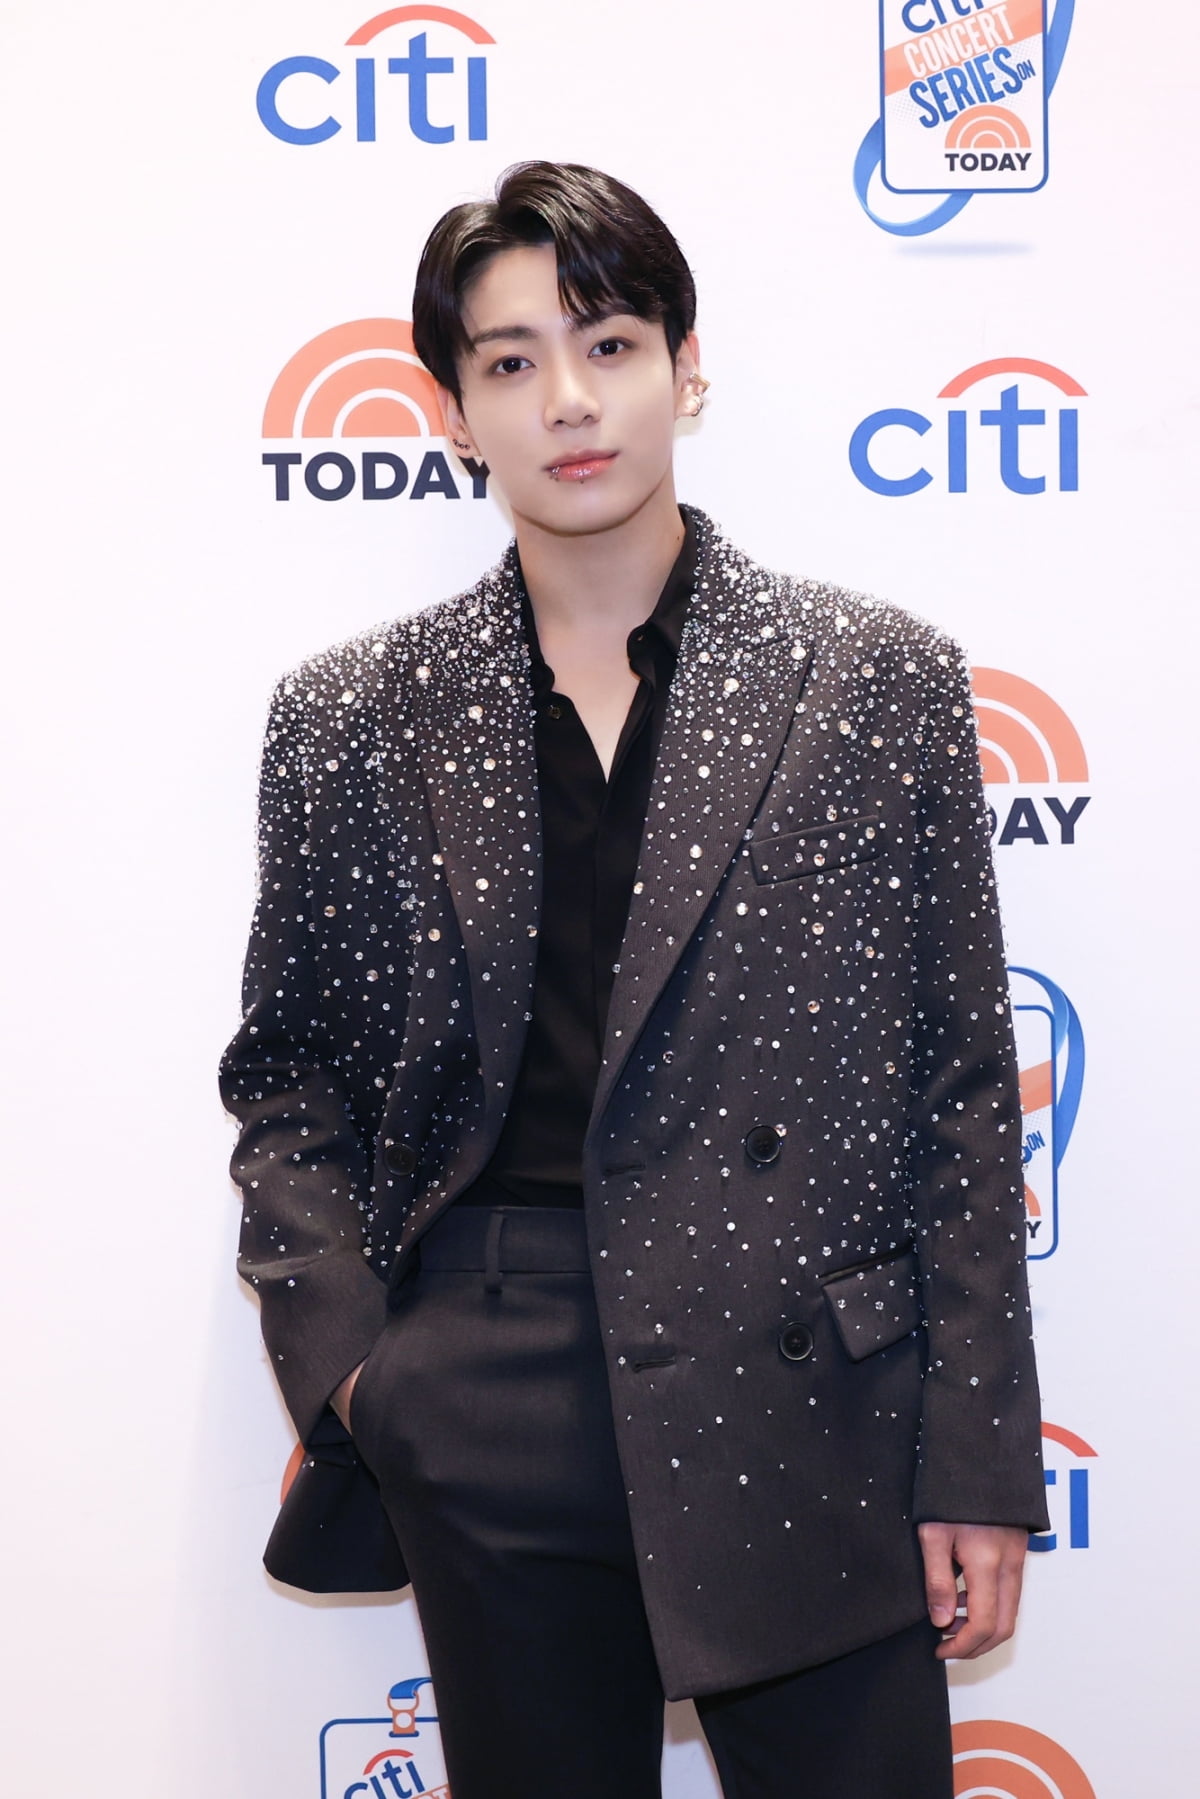 BTS Jungkook appears on NBC's 'Today Show'... Live band performance in the middle of New York